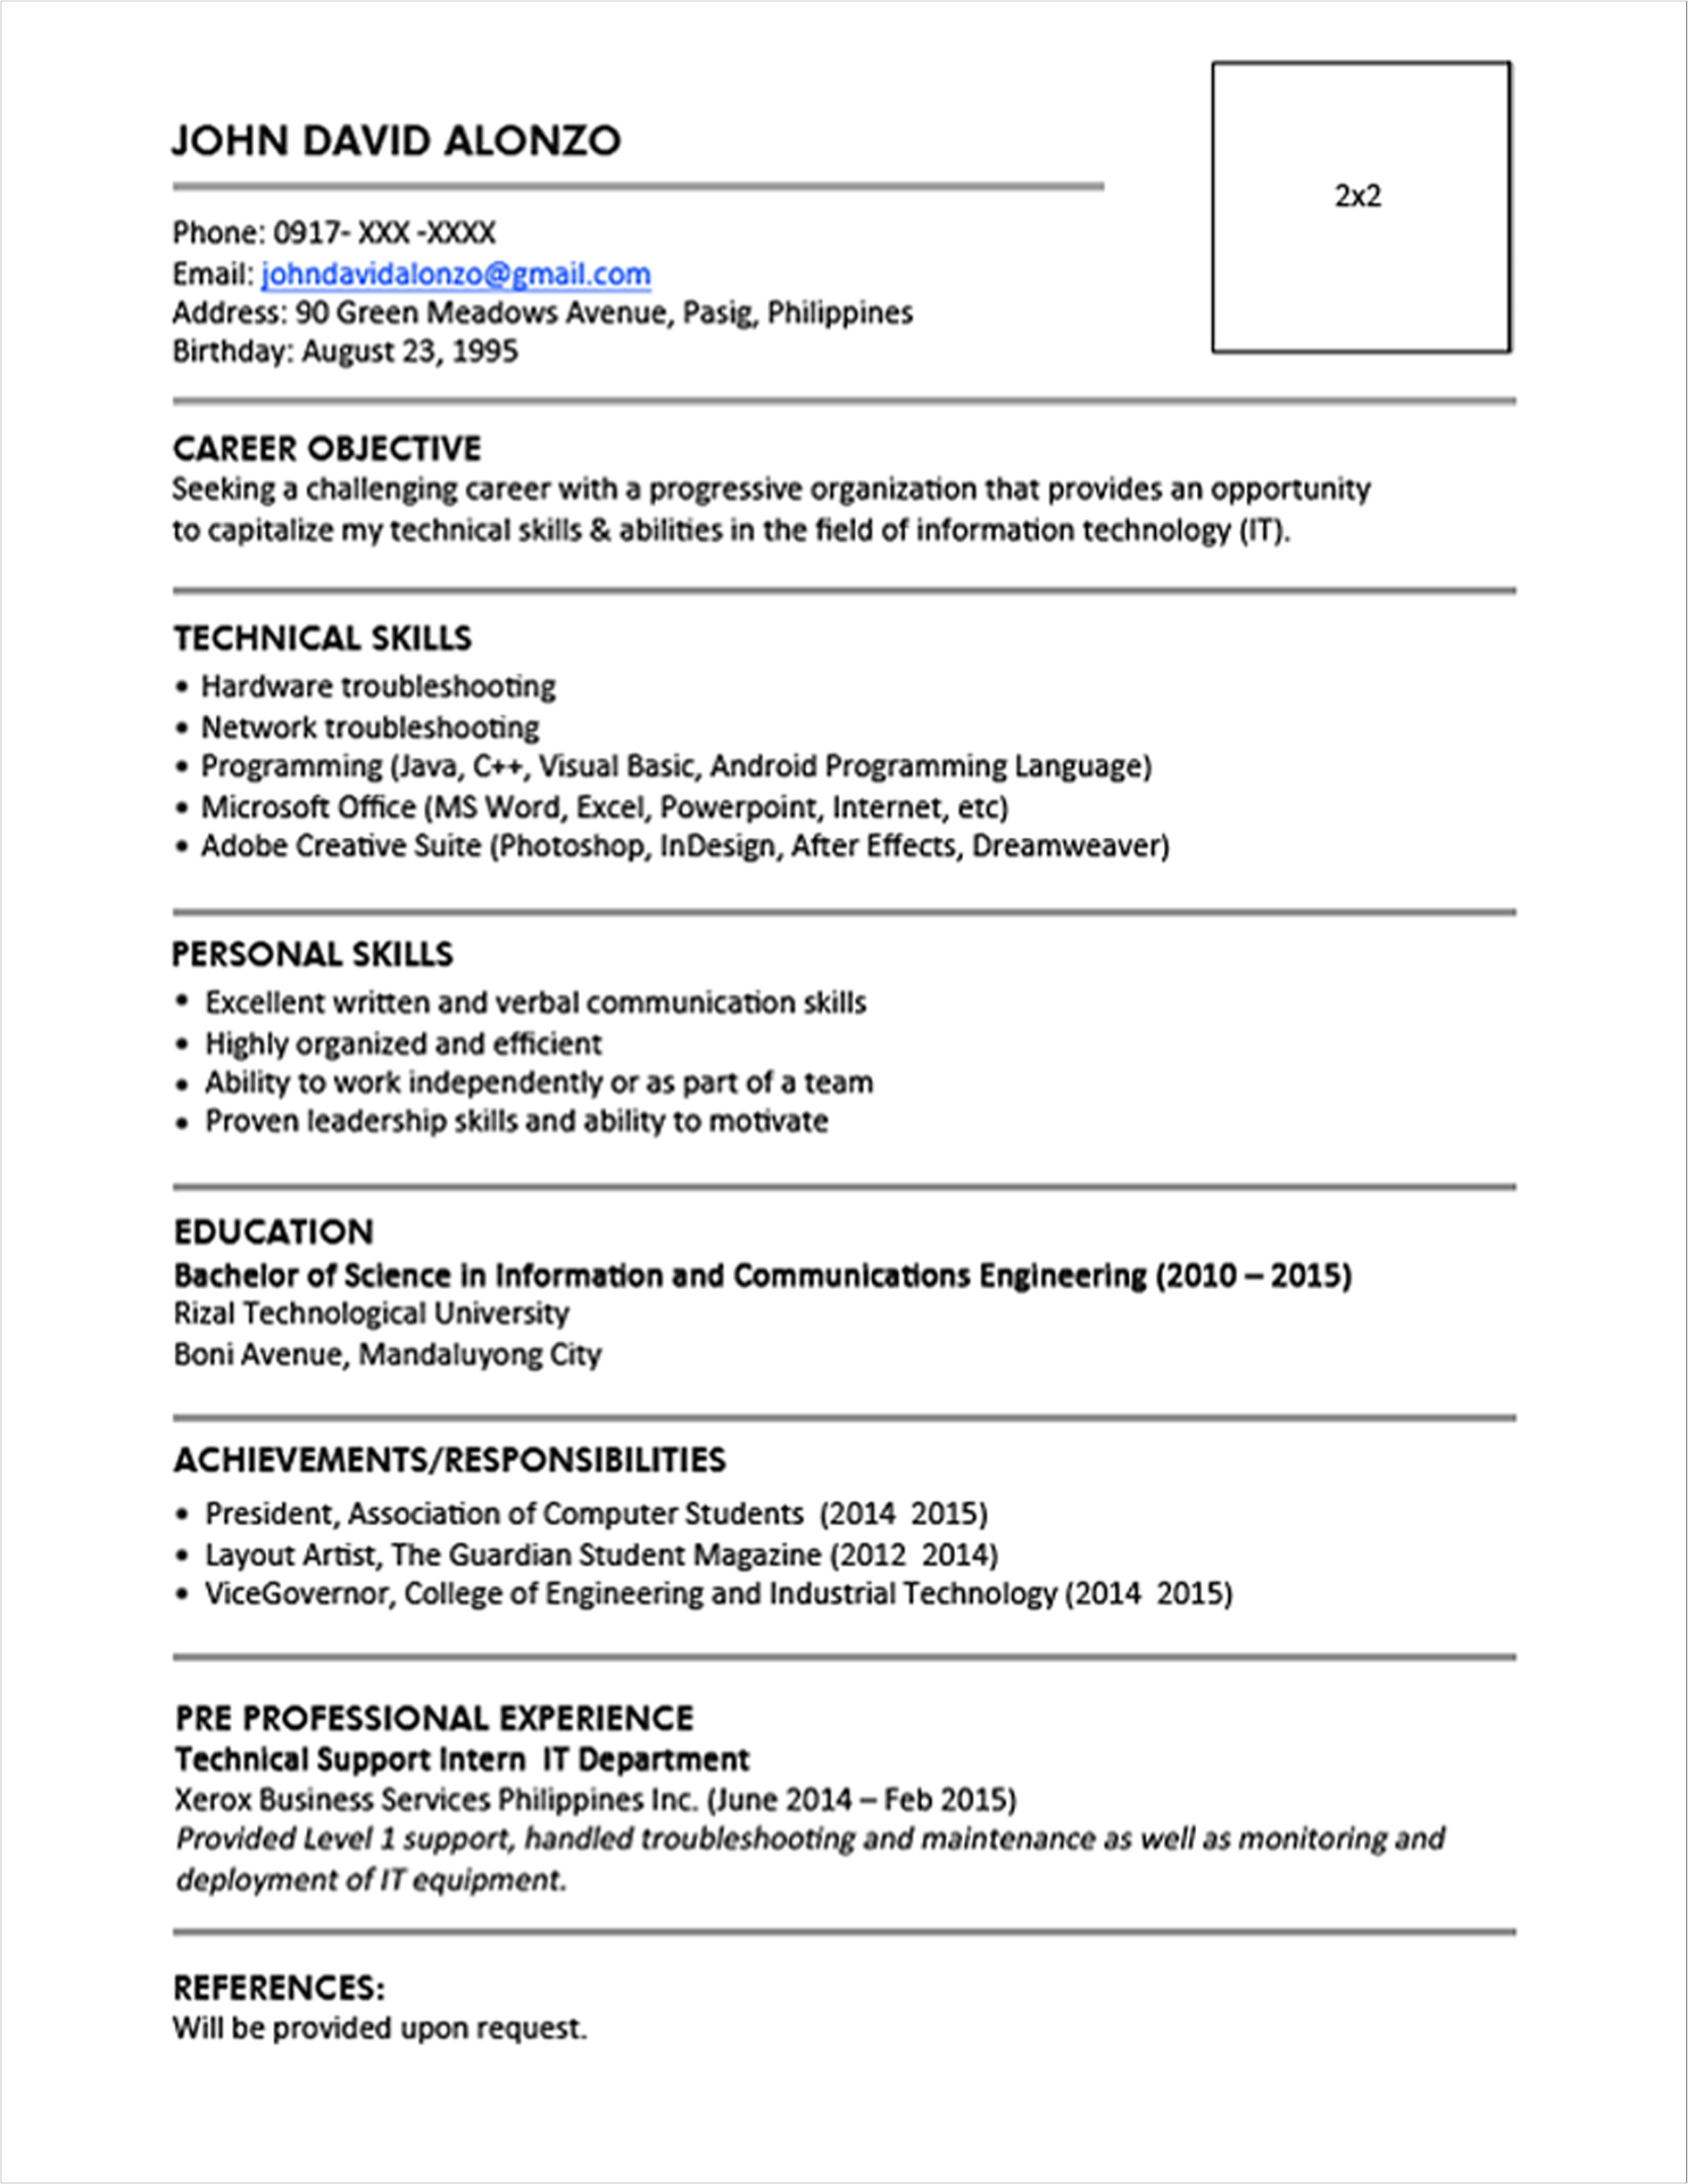 Single Job Resume Template Sample Resume format for Fresh Graduates One Page format